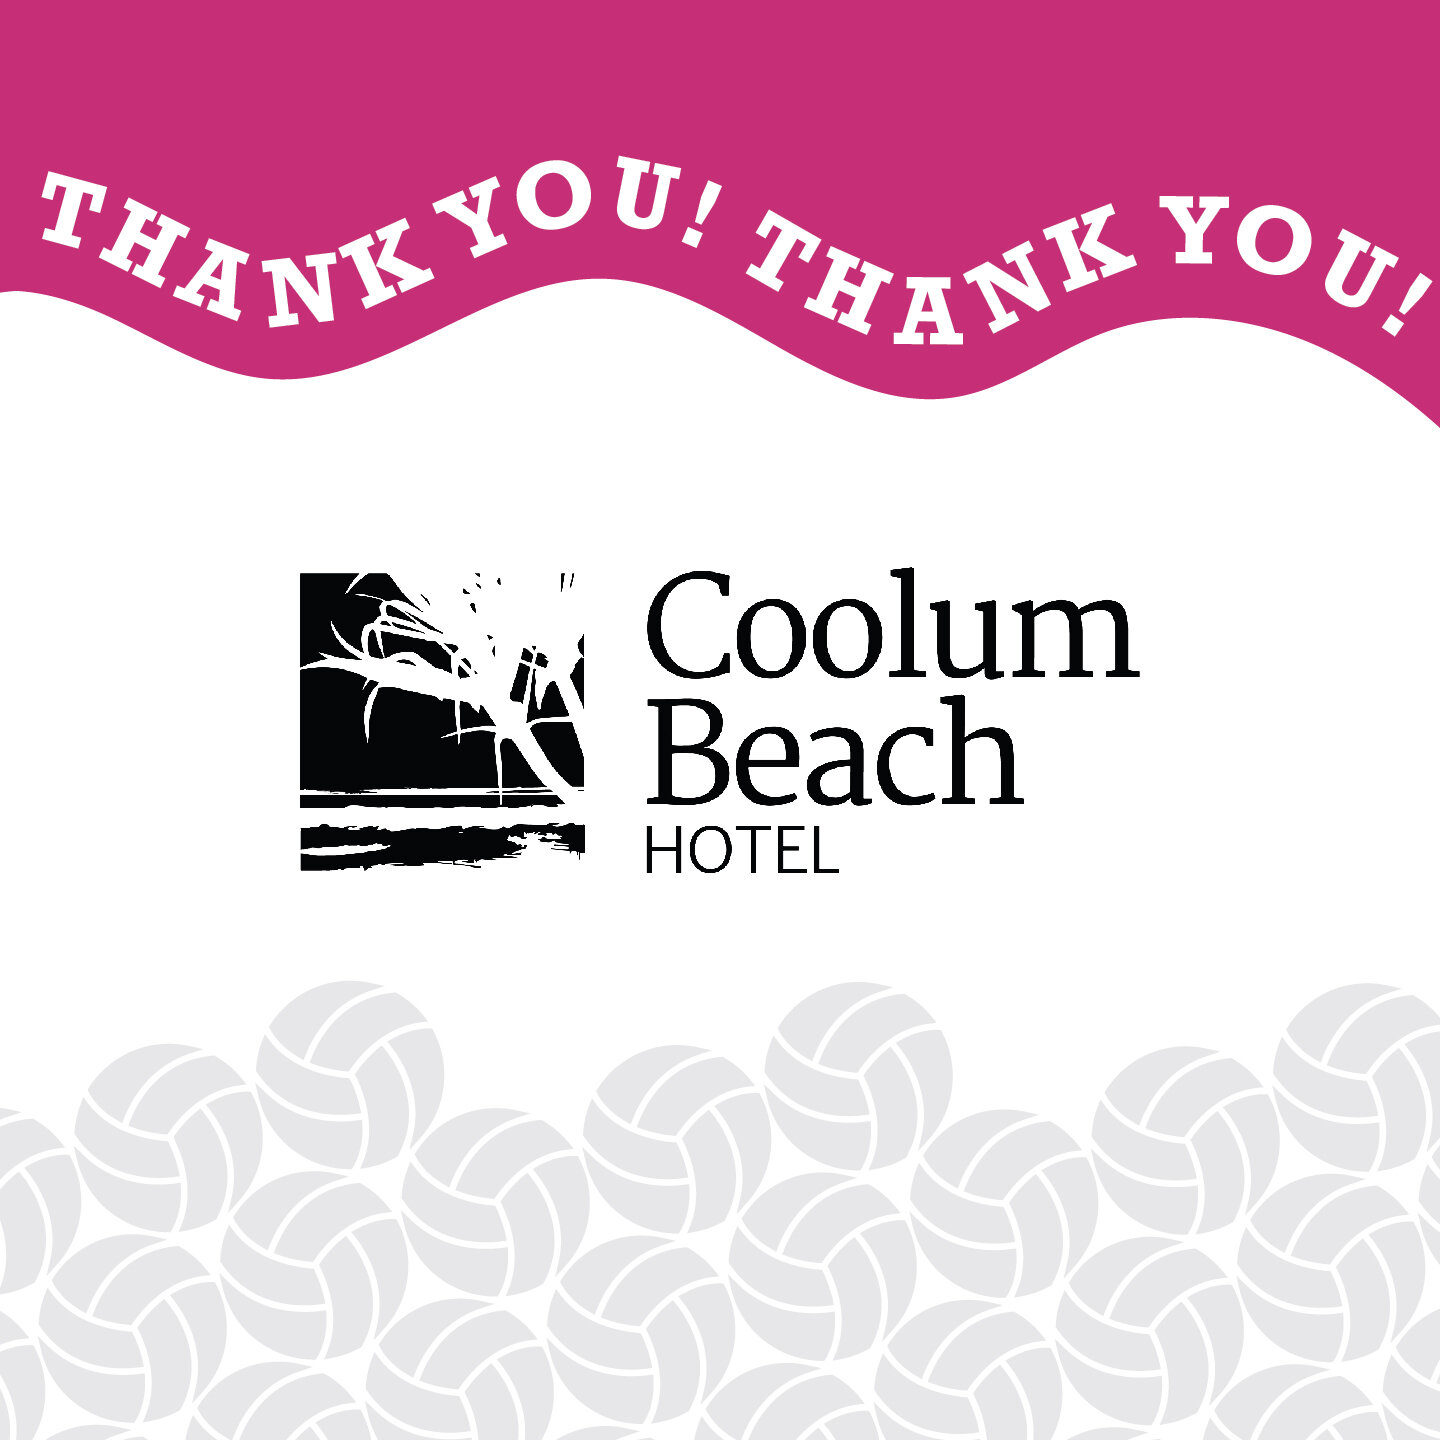 Shout out to these local legends @coolum.beach.hotel our sponsor 🥰 make a huge difference to our club and we can't thank them enough for there commitment and support 🙌

Check out their website https://www.coolumbeachhotel.com.au/ to find their loca